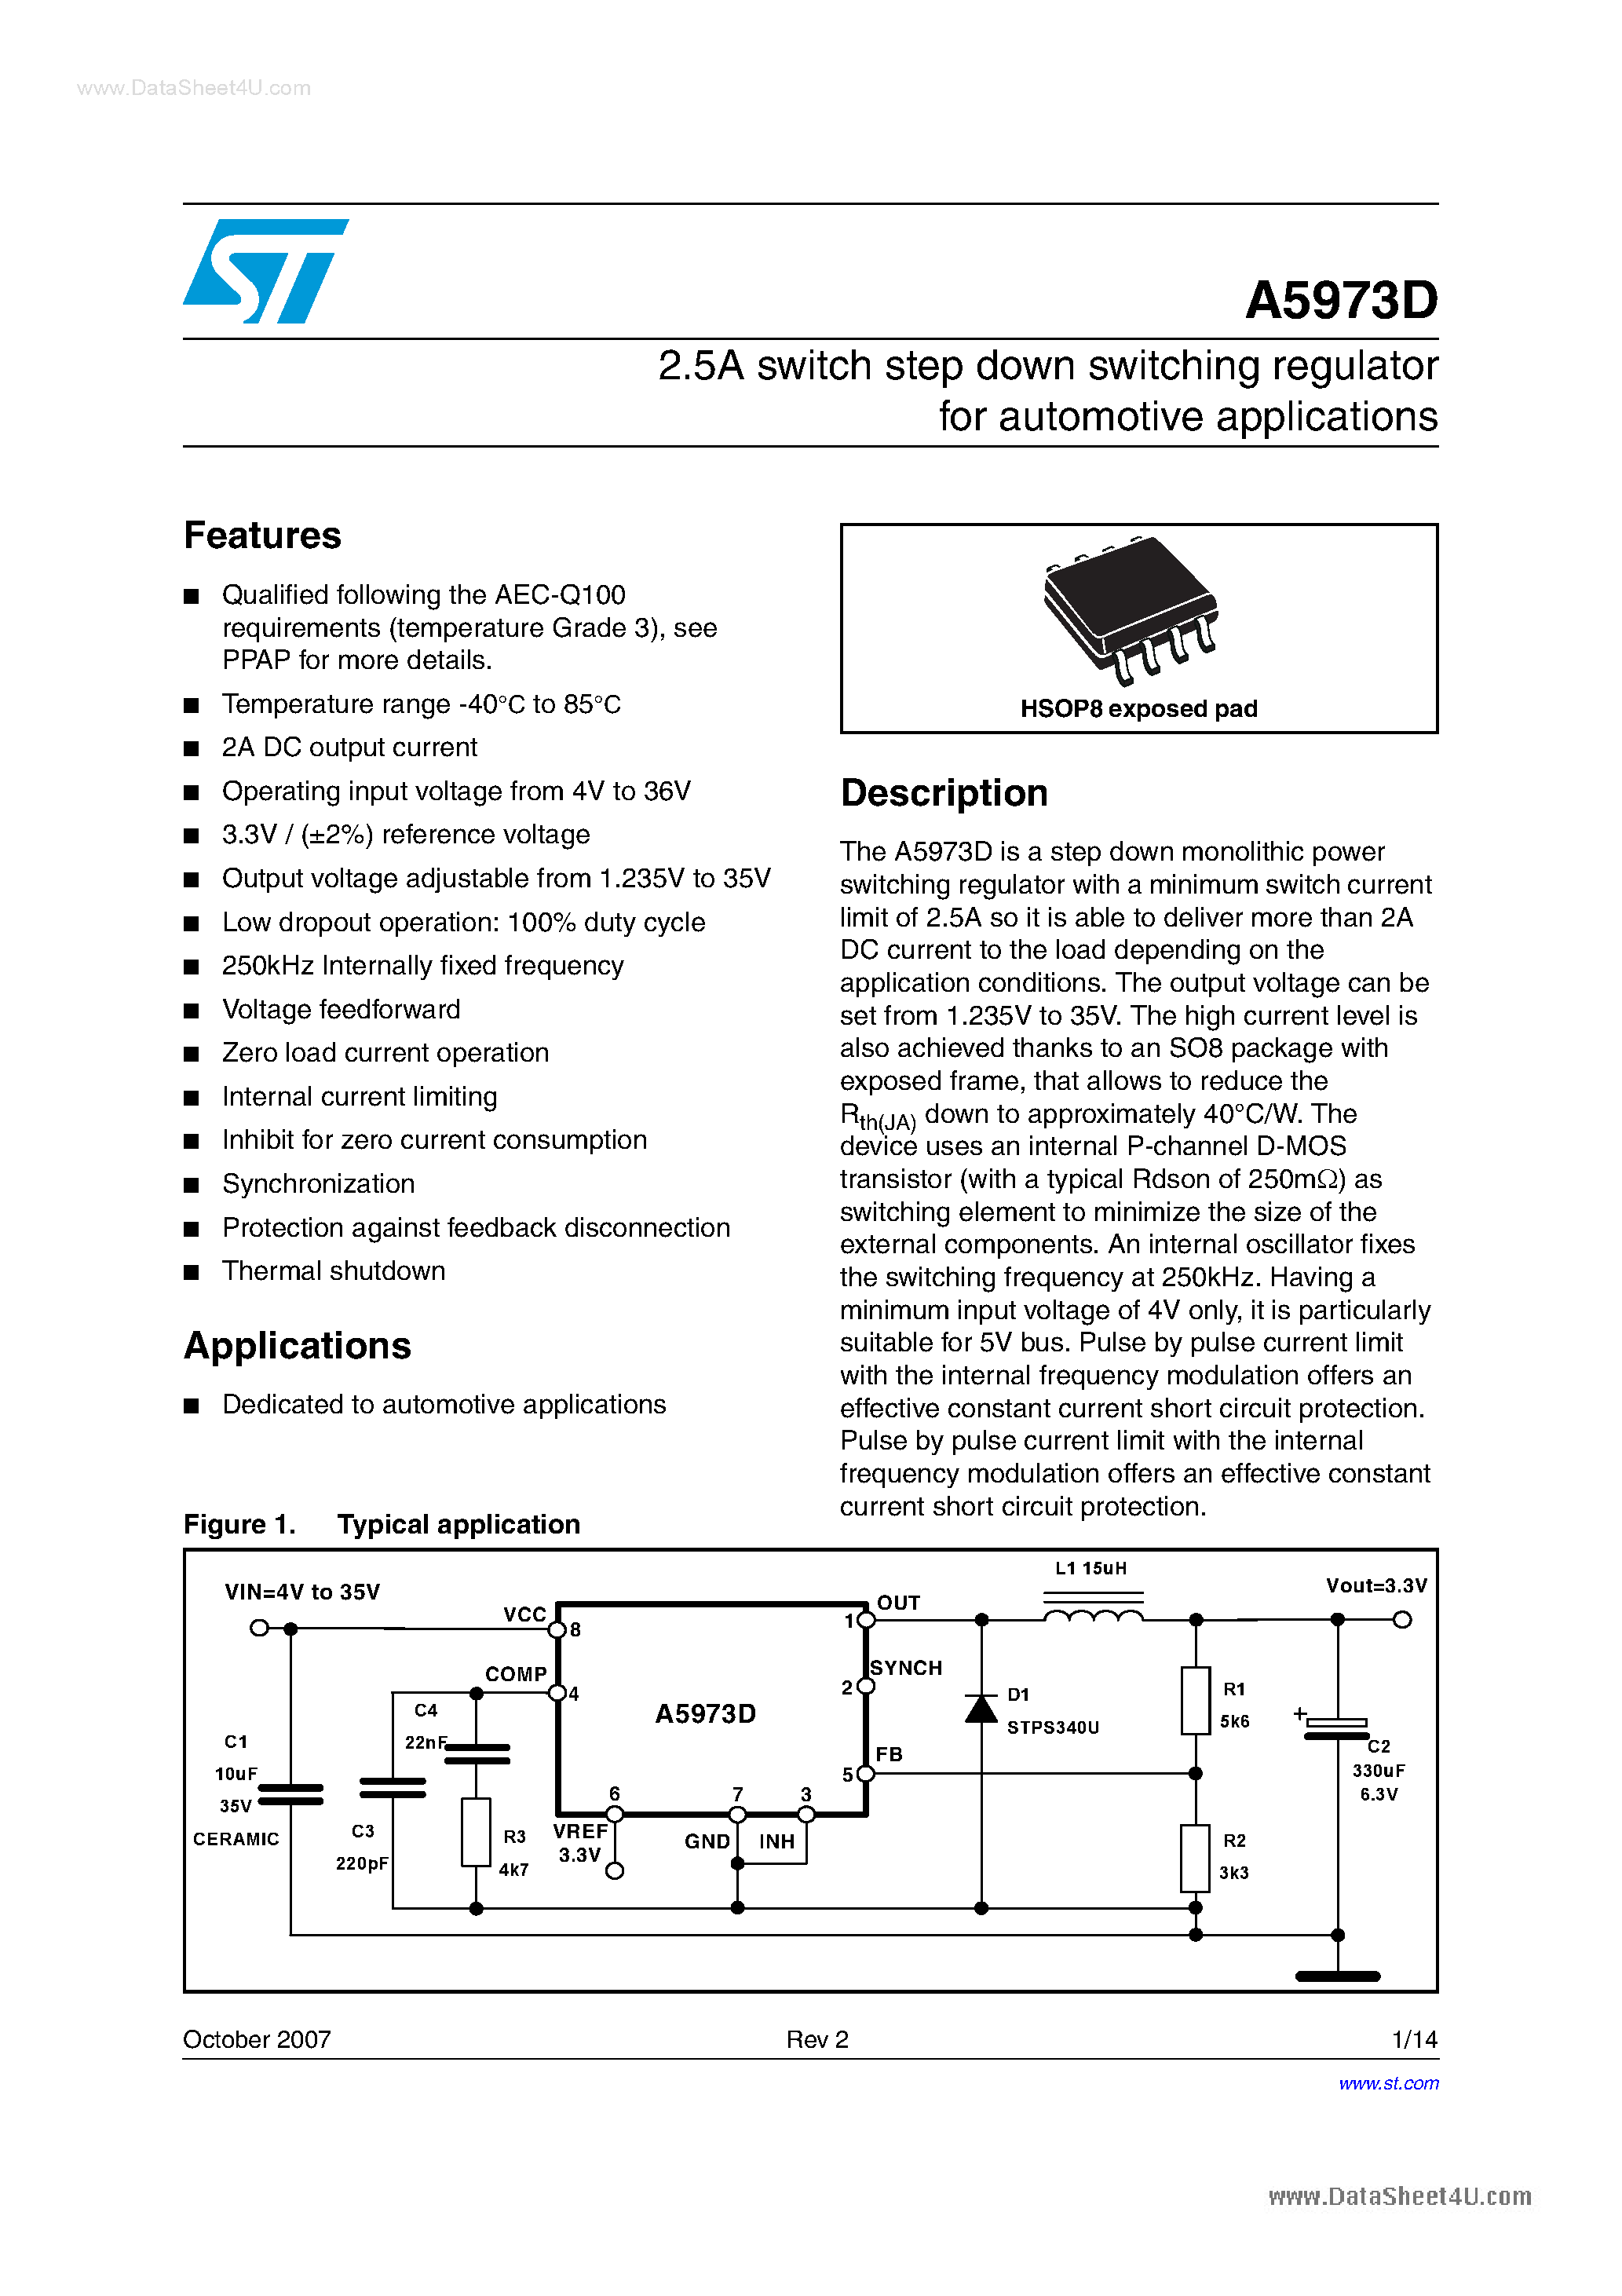 Datasheet A5973D - 2.5A switch step down switching regulator page 1